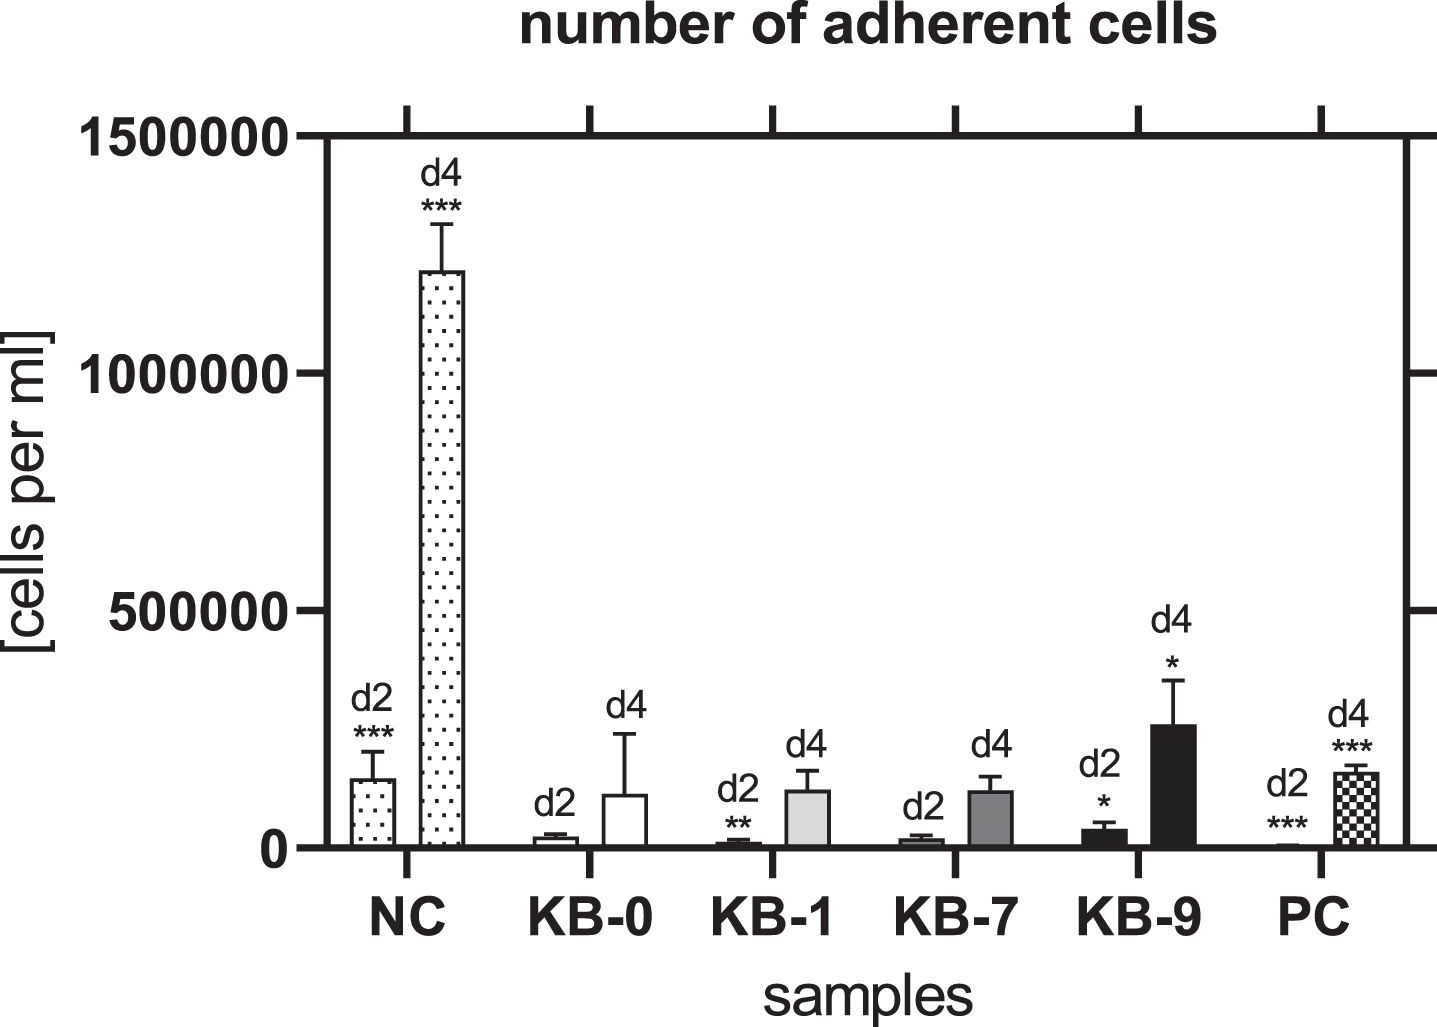 Number of adherent cells two and four days after cell seeding on TCP (NC), KB-0, KB-1, KB-7 and KB-9. Shown are arithmetic mean±standard deviation of n = 6. Statistical significance was analyzed using t-test analysis compared to KB-0. *: p < 0.05, **: p < 0.01, ***: p < 0.001.